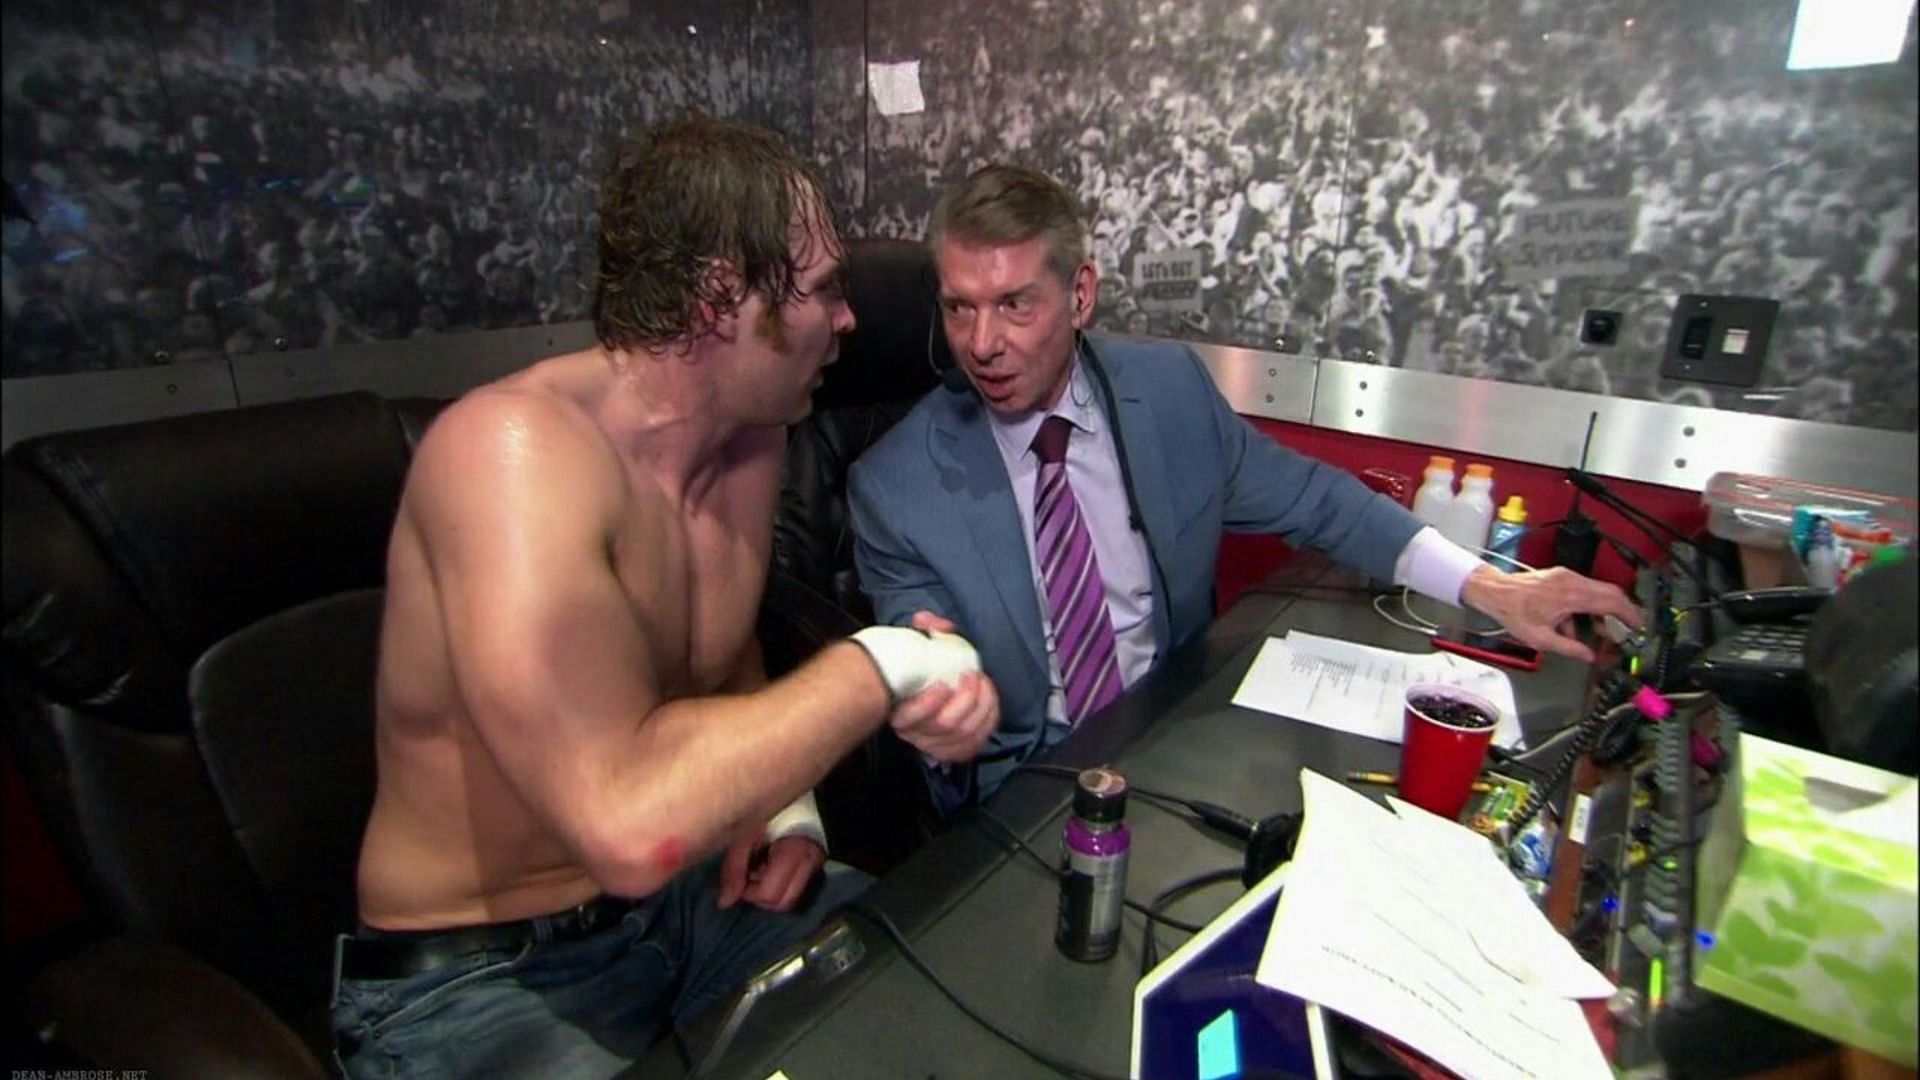 Vince McMahon with Jon Moxley (fka Dean Ambrose) backstage